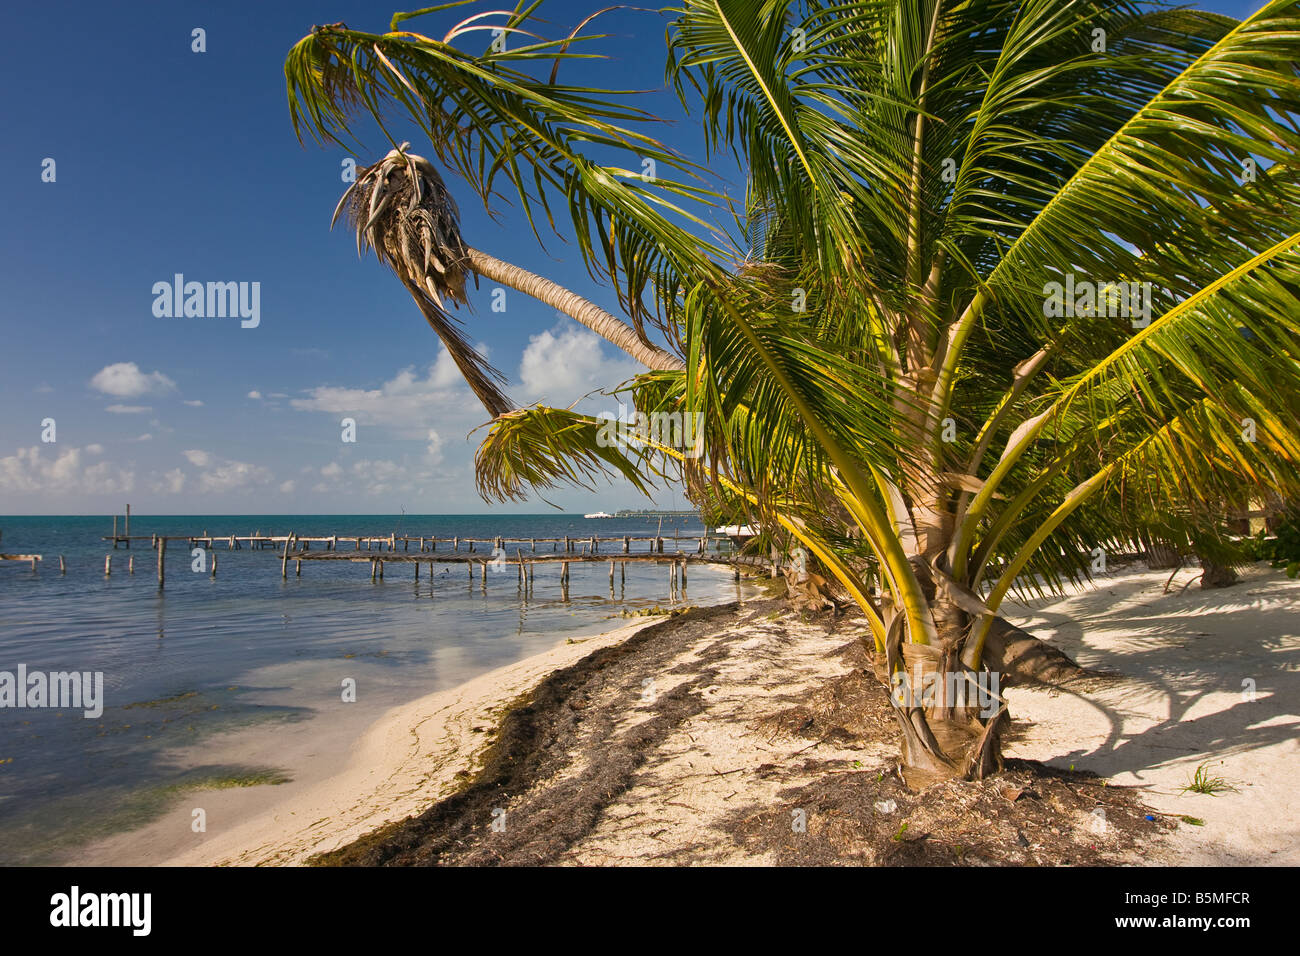 CAYE CAULKER BELIZE Palm tree on beach and old wooden docks Stock Photo